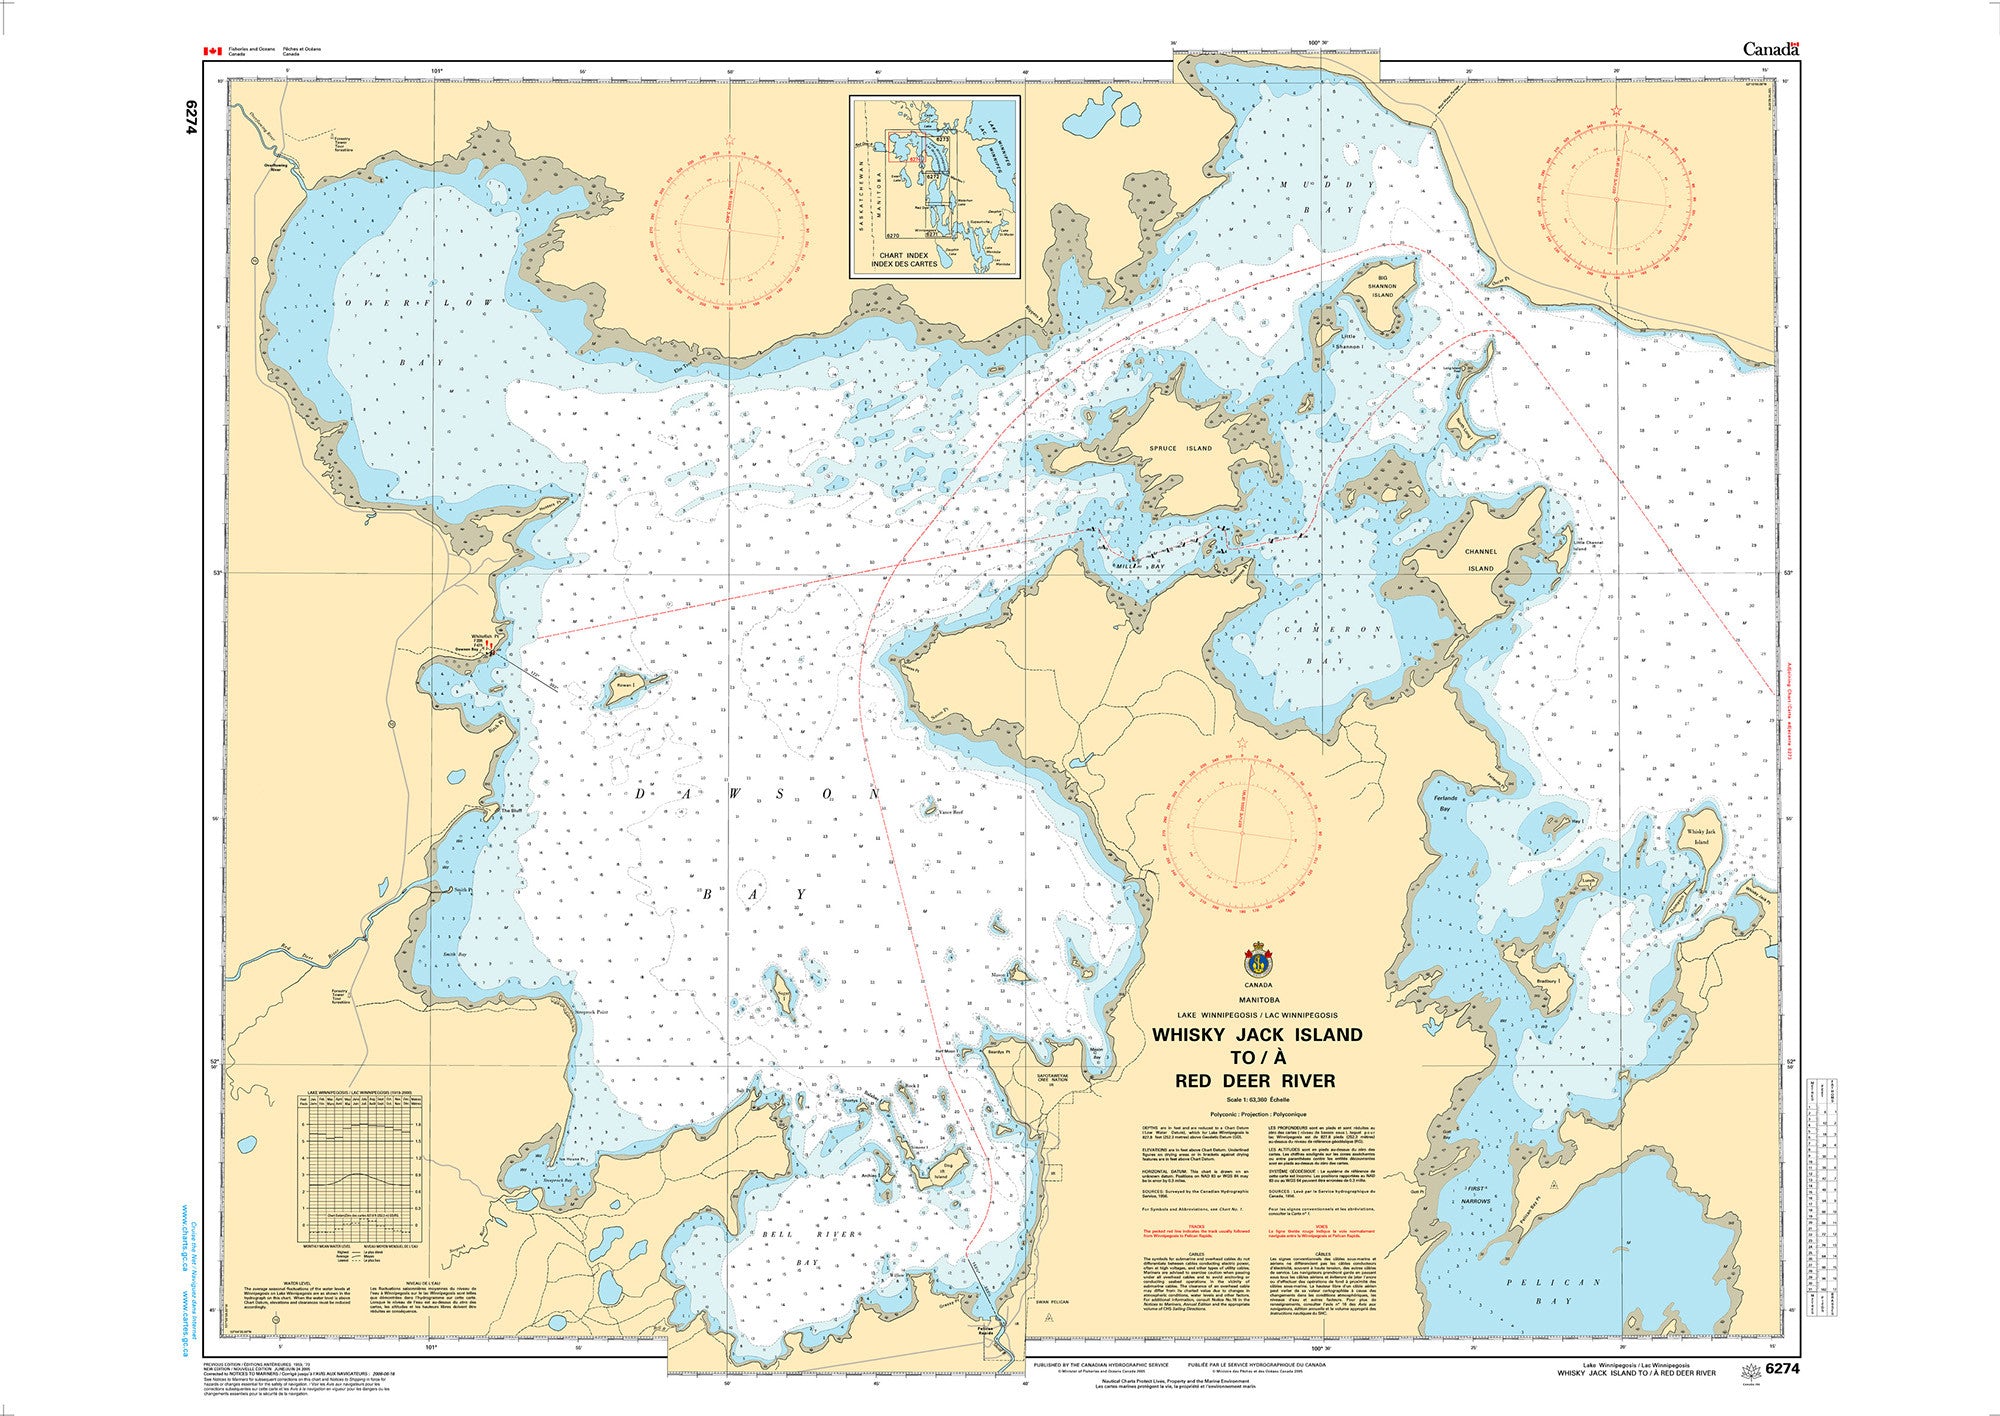 Canadian Hydrographic Service Nautical Chart CHS6274: Whiskey Jack Island to/à Red Deer River